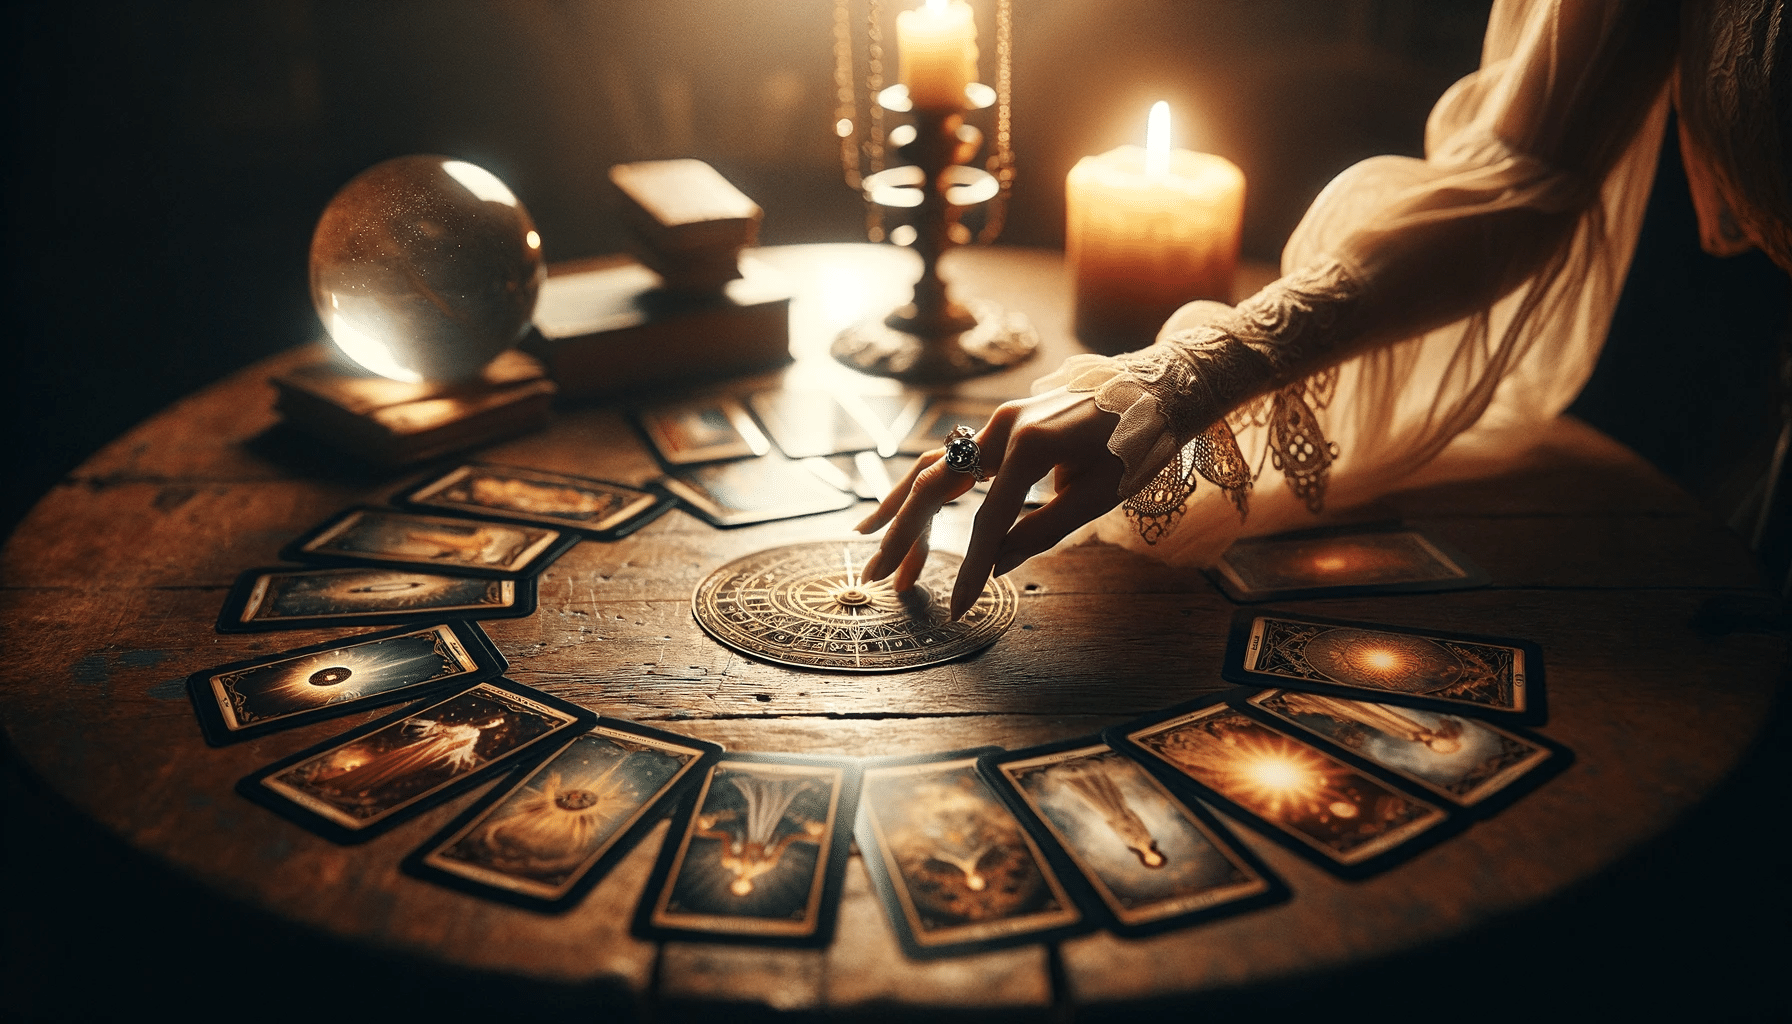 A hand lays out tarot cards on a wooden table for interpreting tarot cards for self-discovery, with a glowing candle and crystal ball behind.